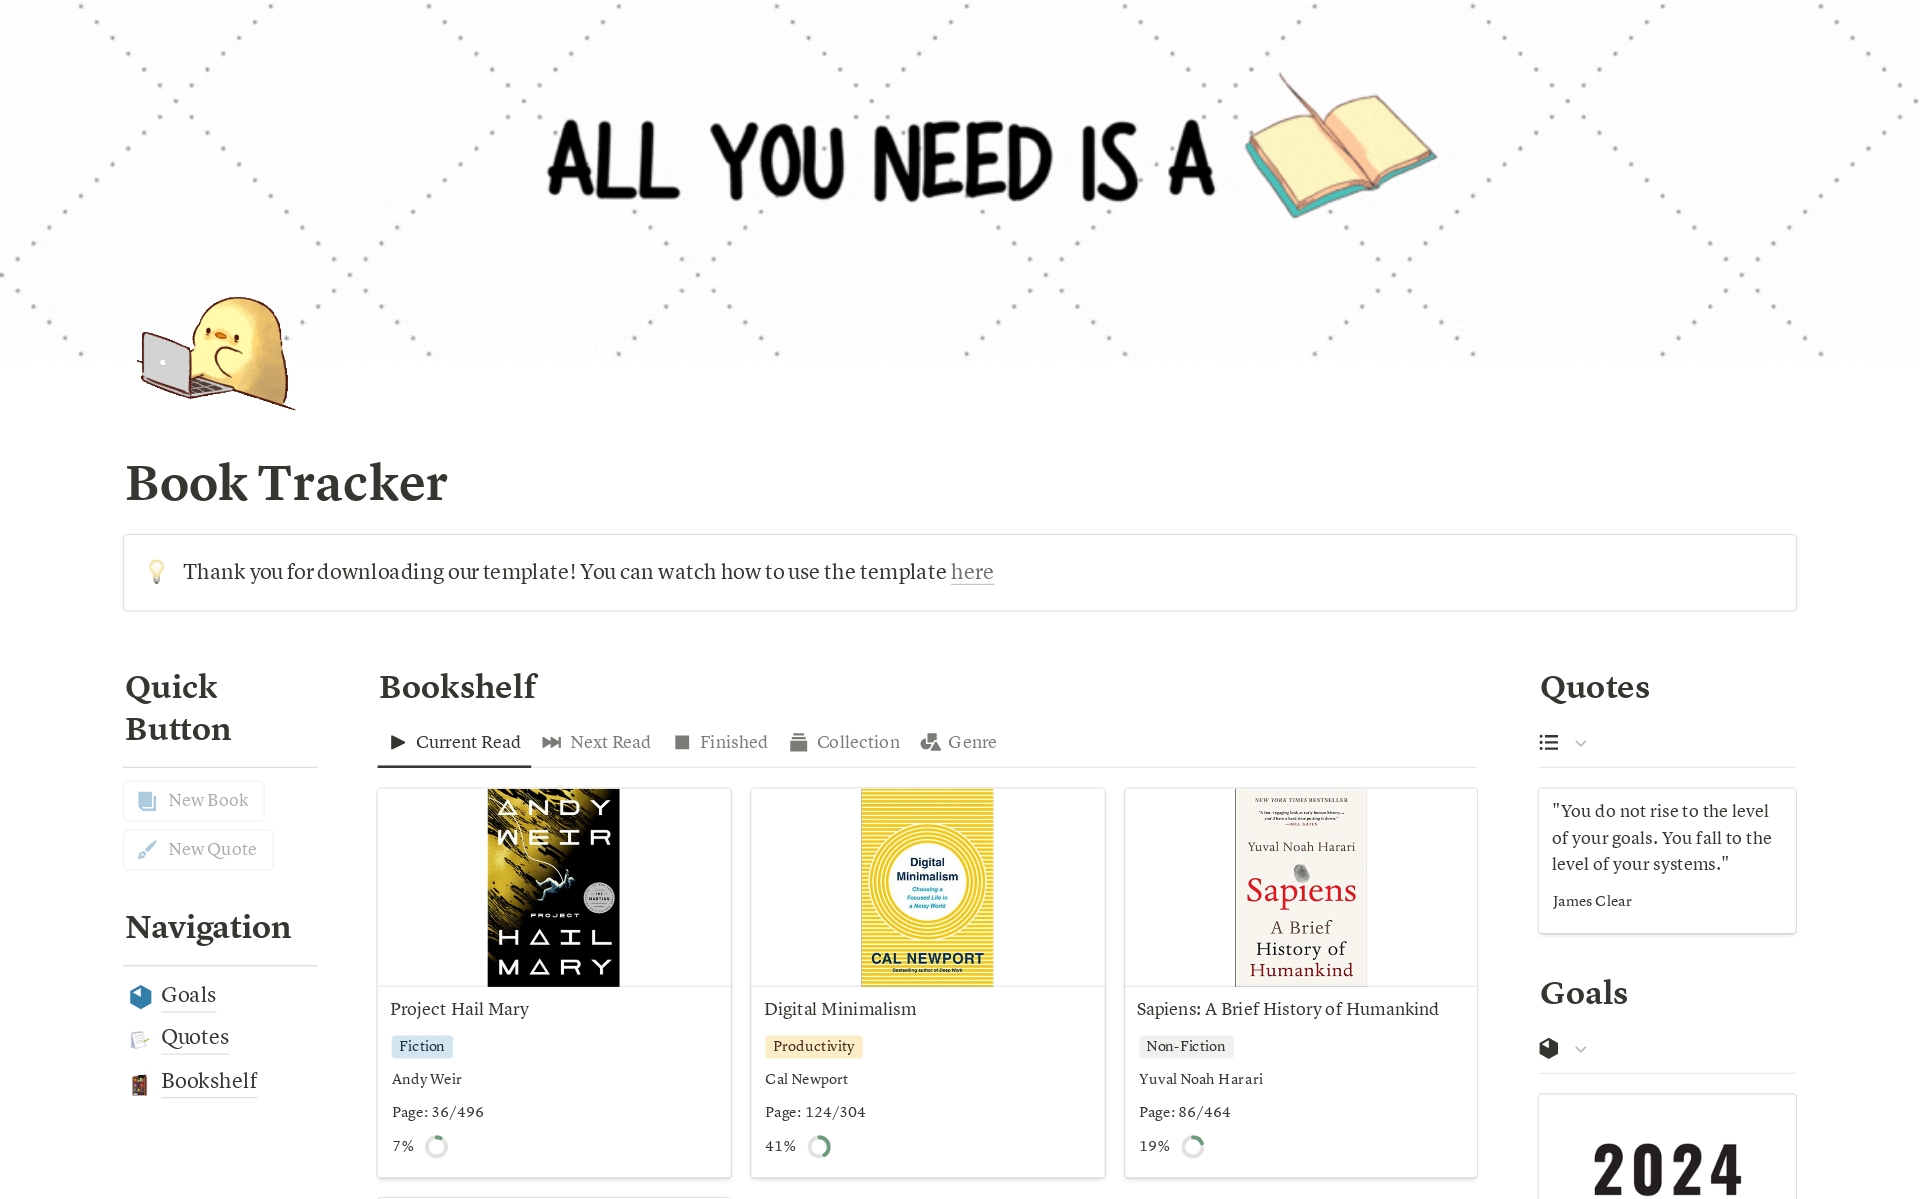 Curate your shelf, Dive into your reads, Let the knowledge thrive.
Introducing your favorite reading companion: Book Tracker 📚
